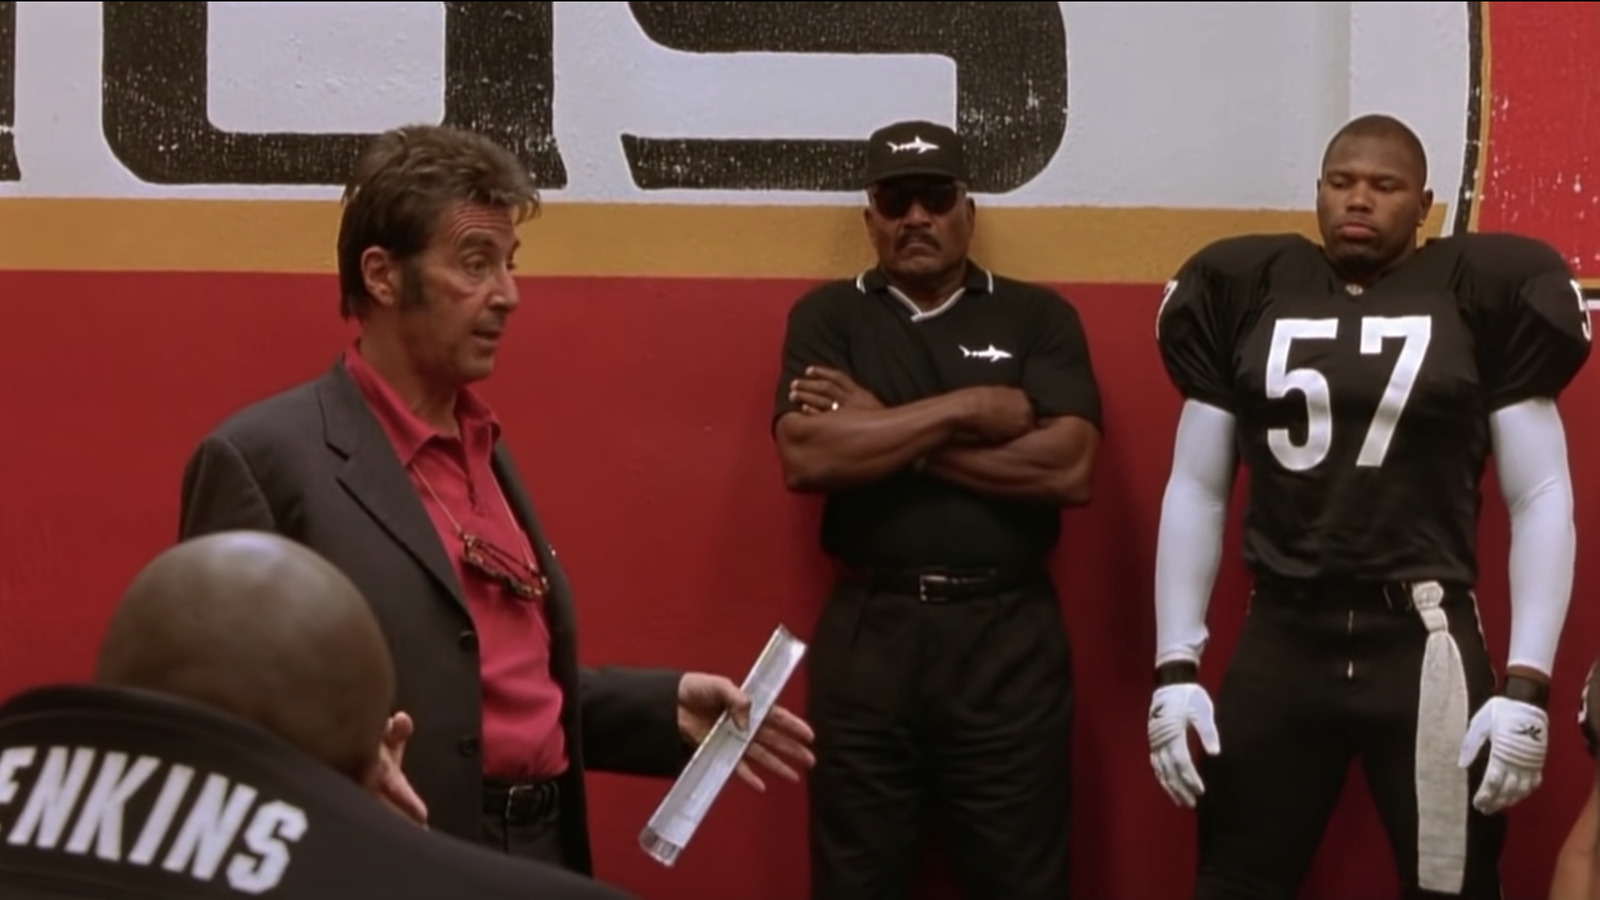 Al Pacino A game of inches. Any Given Sunday : r/miamidolphins